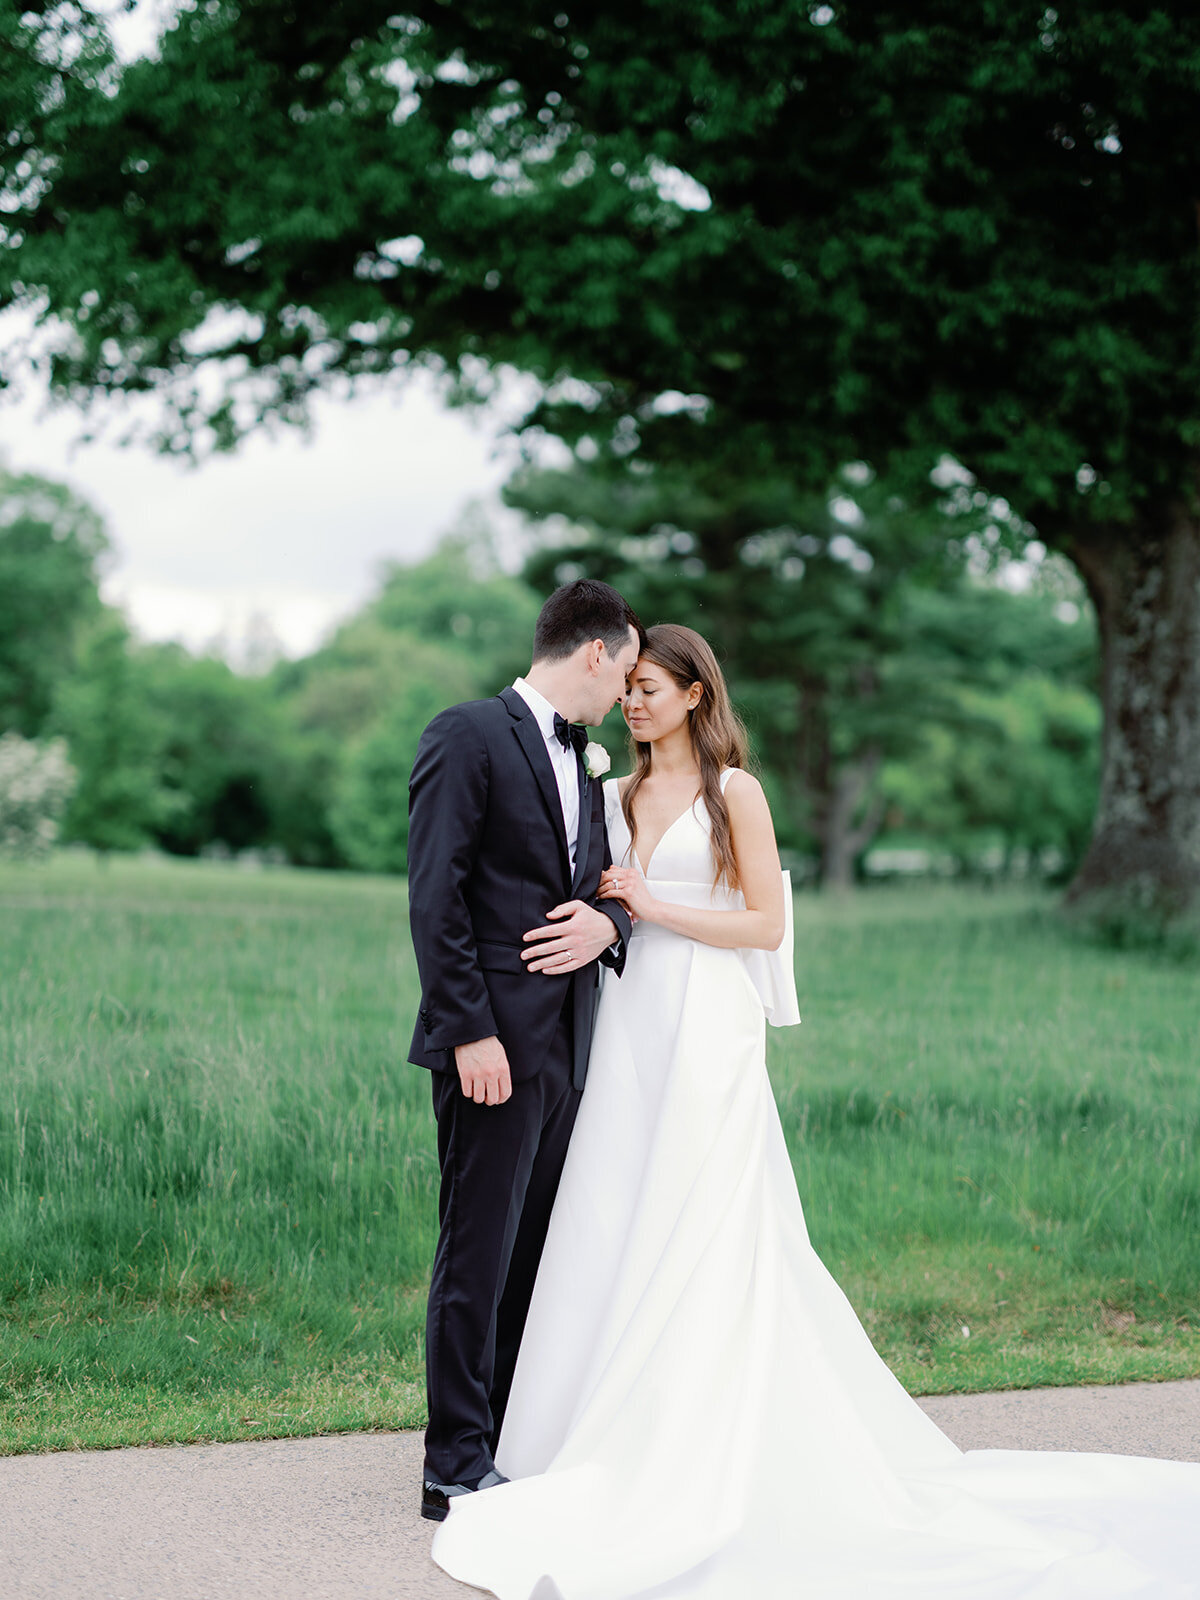 Bride and groom close eyes for a classic portrait on the path of the course at congressional country club